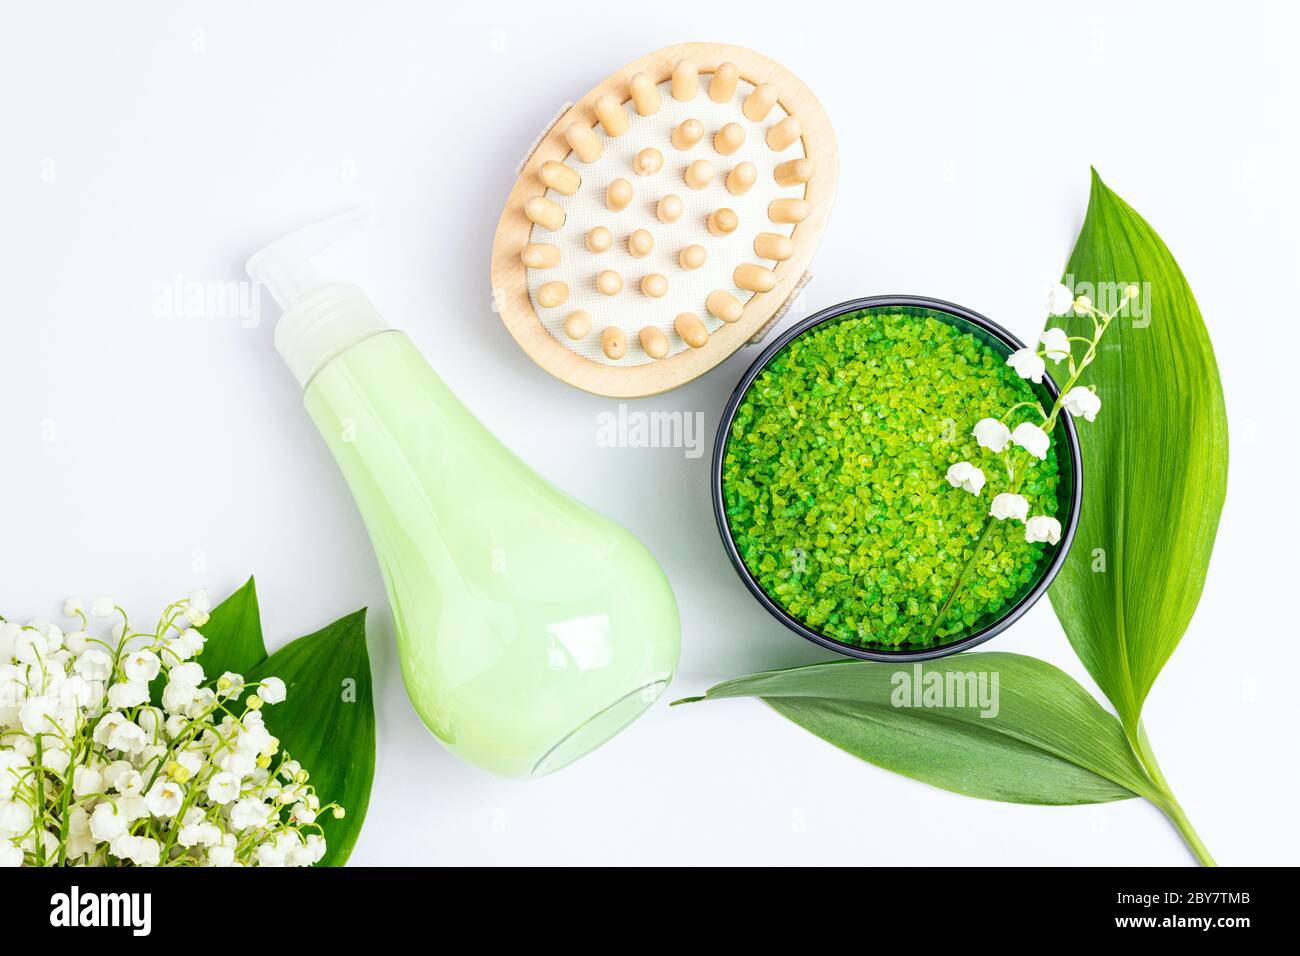 Spa treatment wellness concept. Natural spa cosmetics products and accessories, massage brush, soap, herbal sea salt, flowers on white background. Spa Stock Photo